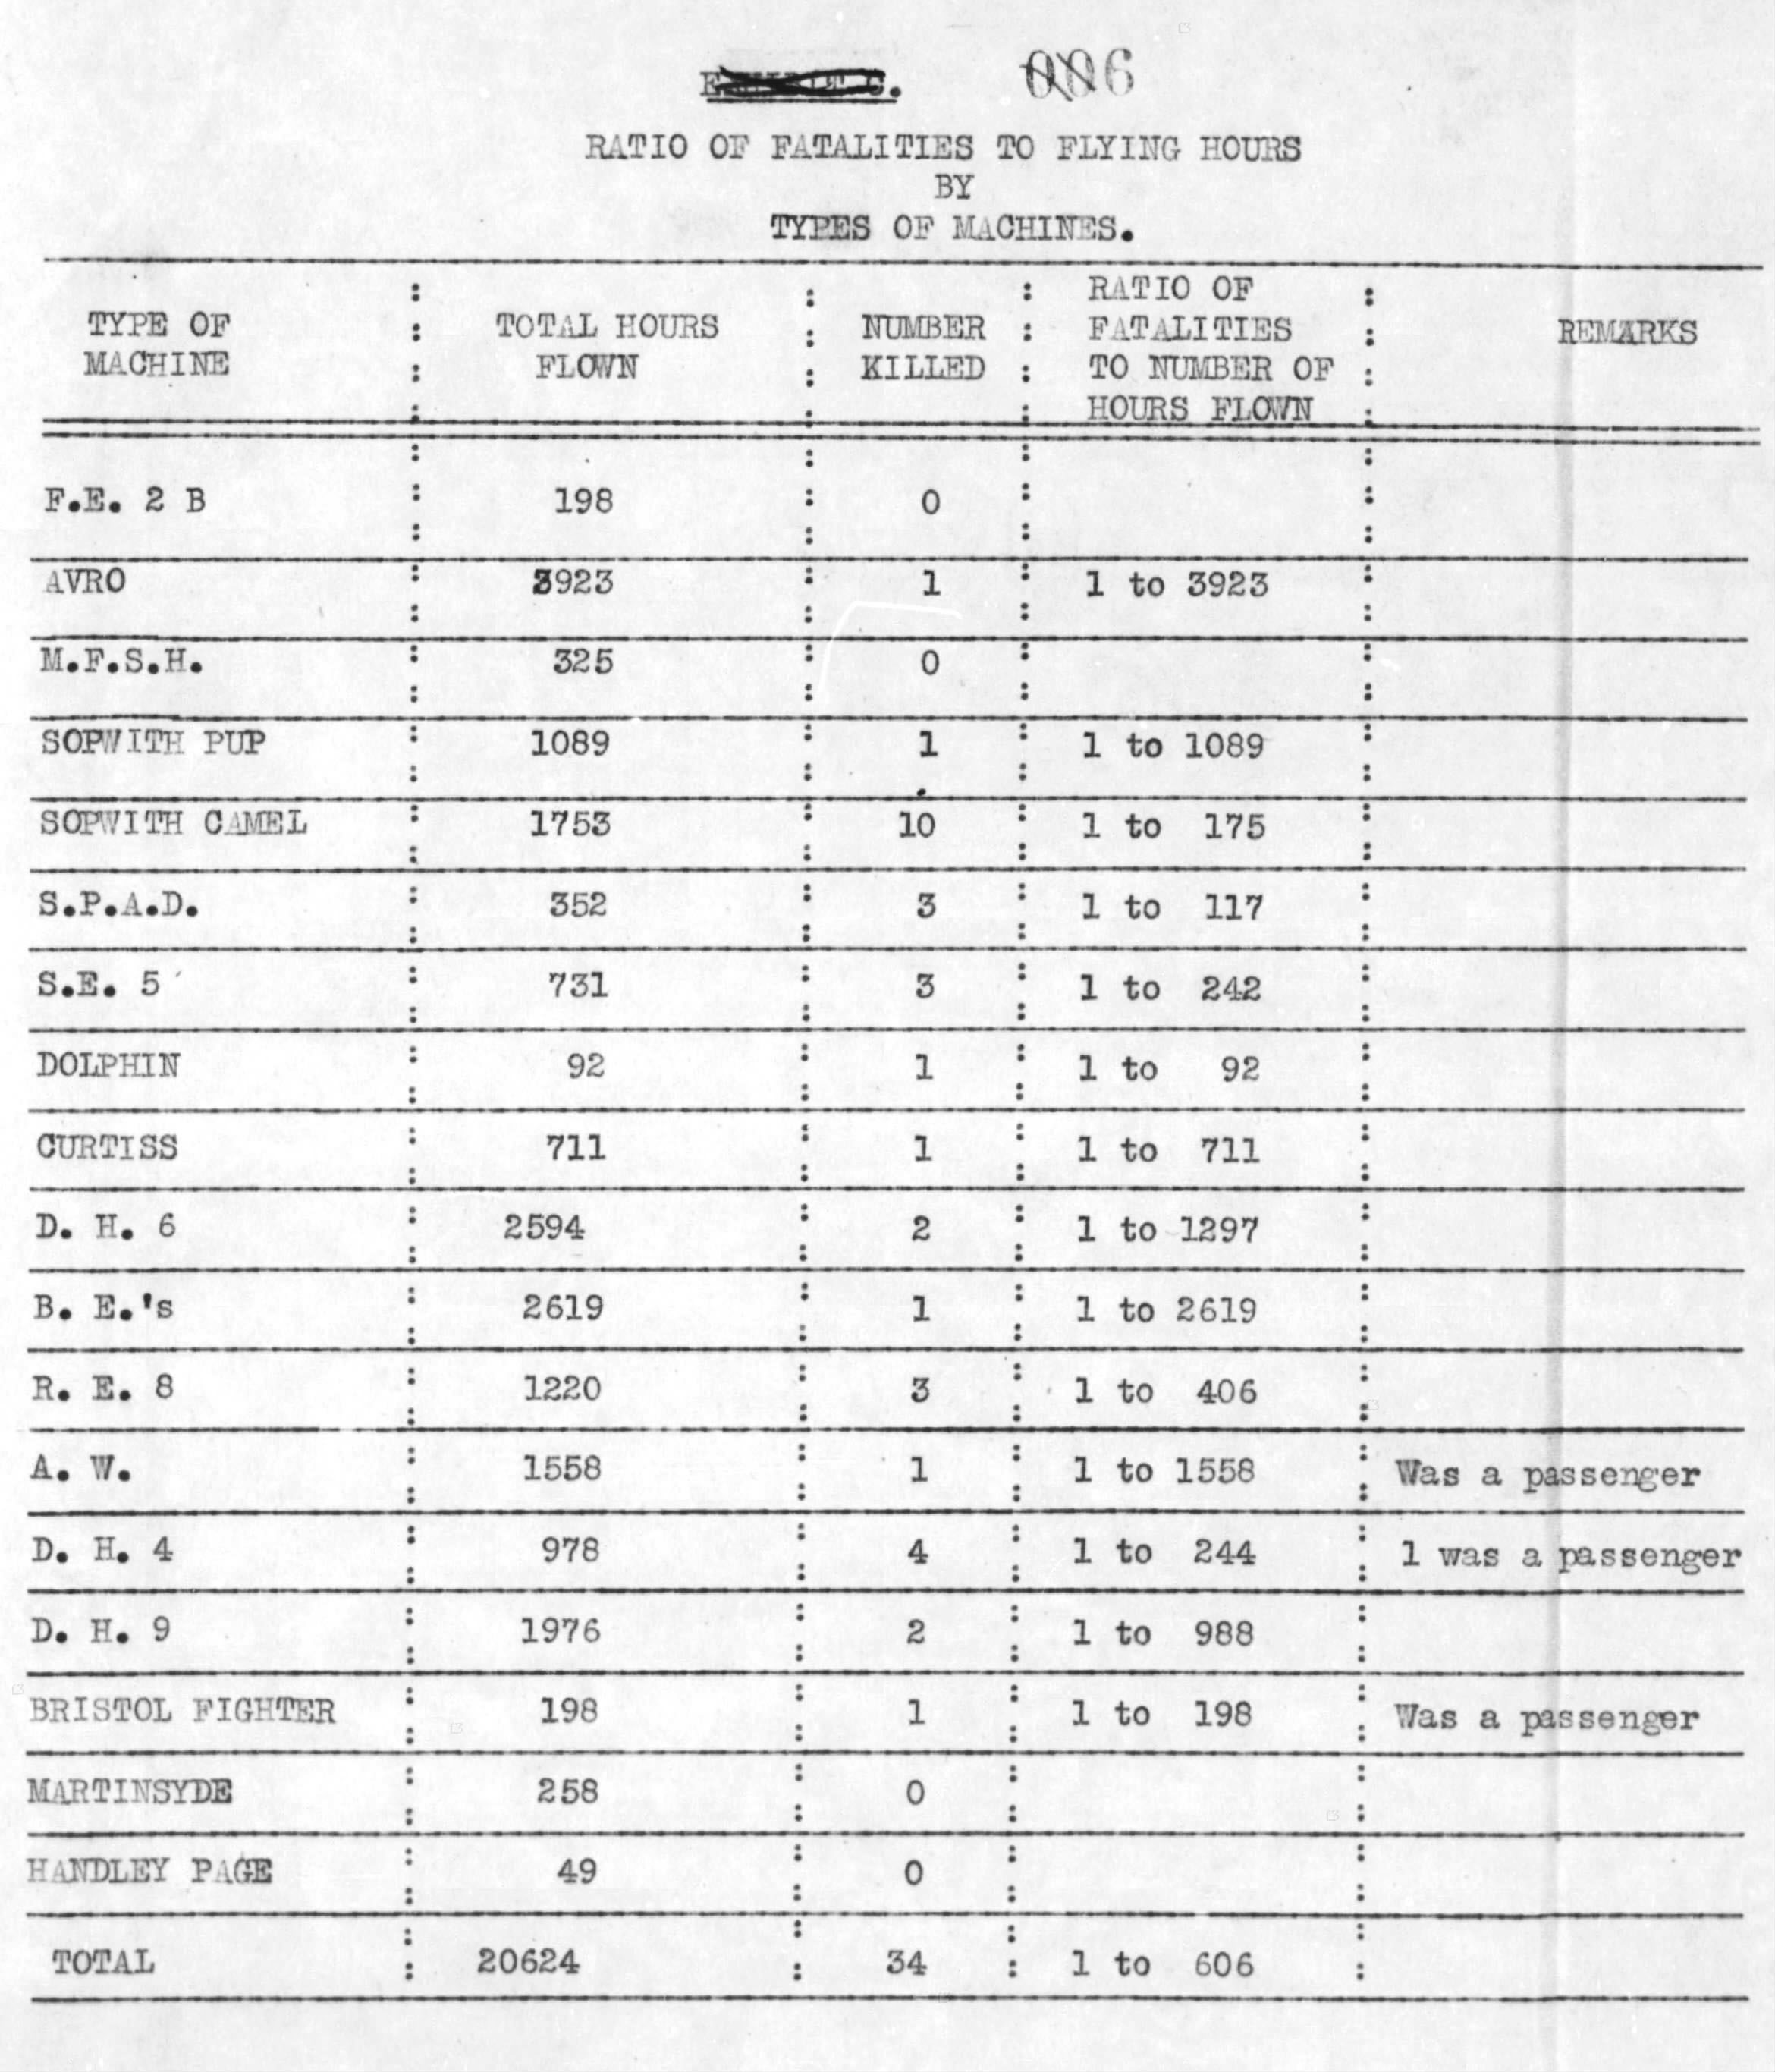 A table titled "Ratio of Fatalities to Flying Hours by Types of Machine. The first column list the plane type, the second the number of hours flown, the third the number of fatalities, the fourth the ratio, with a fifth column indicating in three cases that the fatality was a passenger. The most fatalities involved Camels, but because the number of hours flown is relatively low in Spads, the ratio of hours to fatalities is worse for Spads.